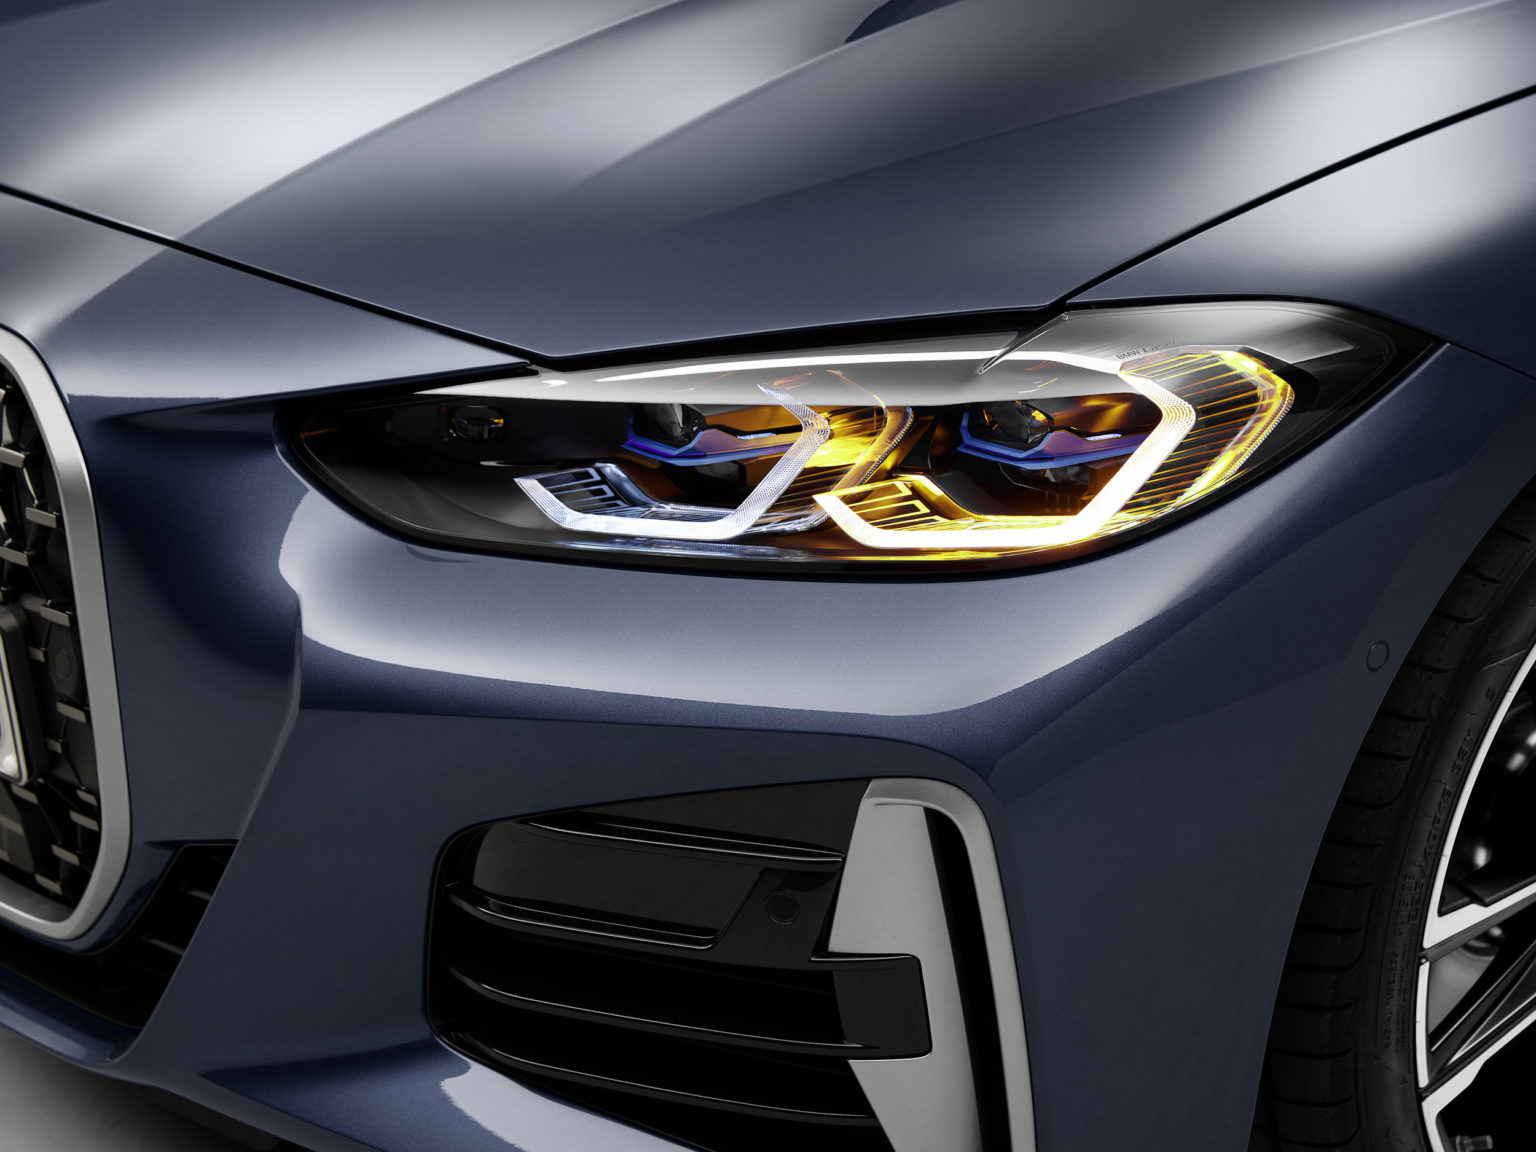 BMW, which recently introduced the new 4 Series coupe is one of the most valuable automotive brands in the world.